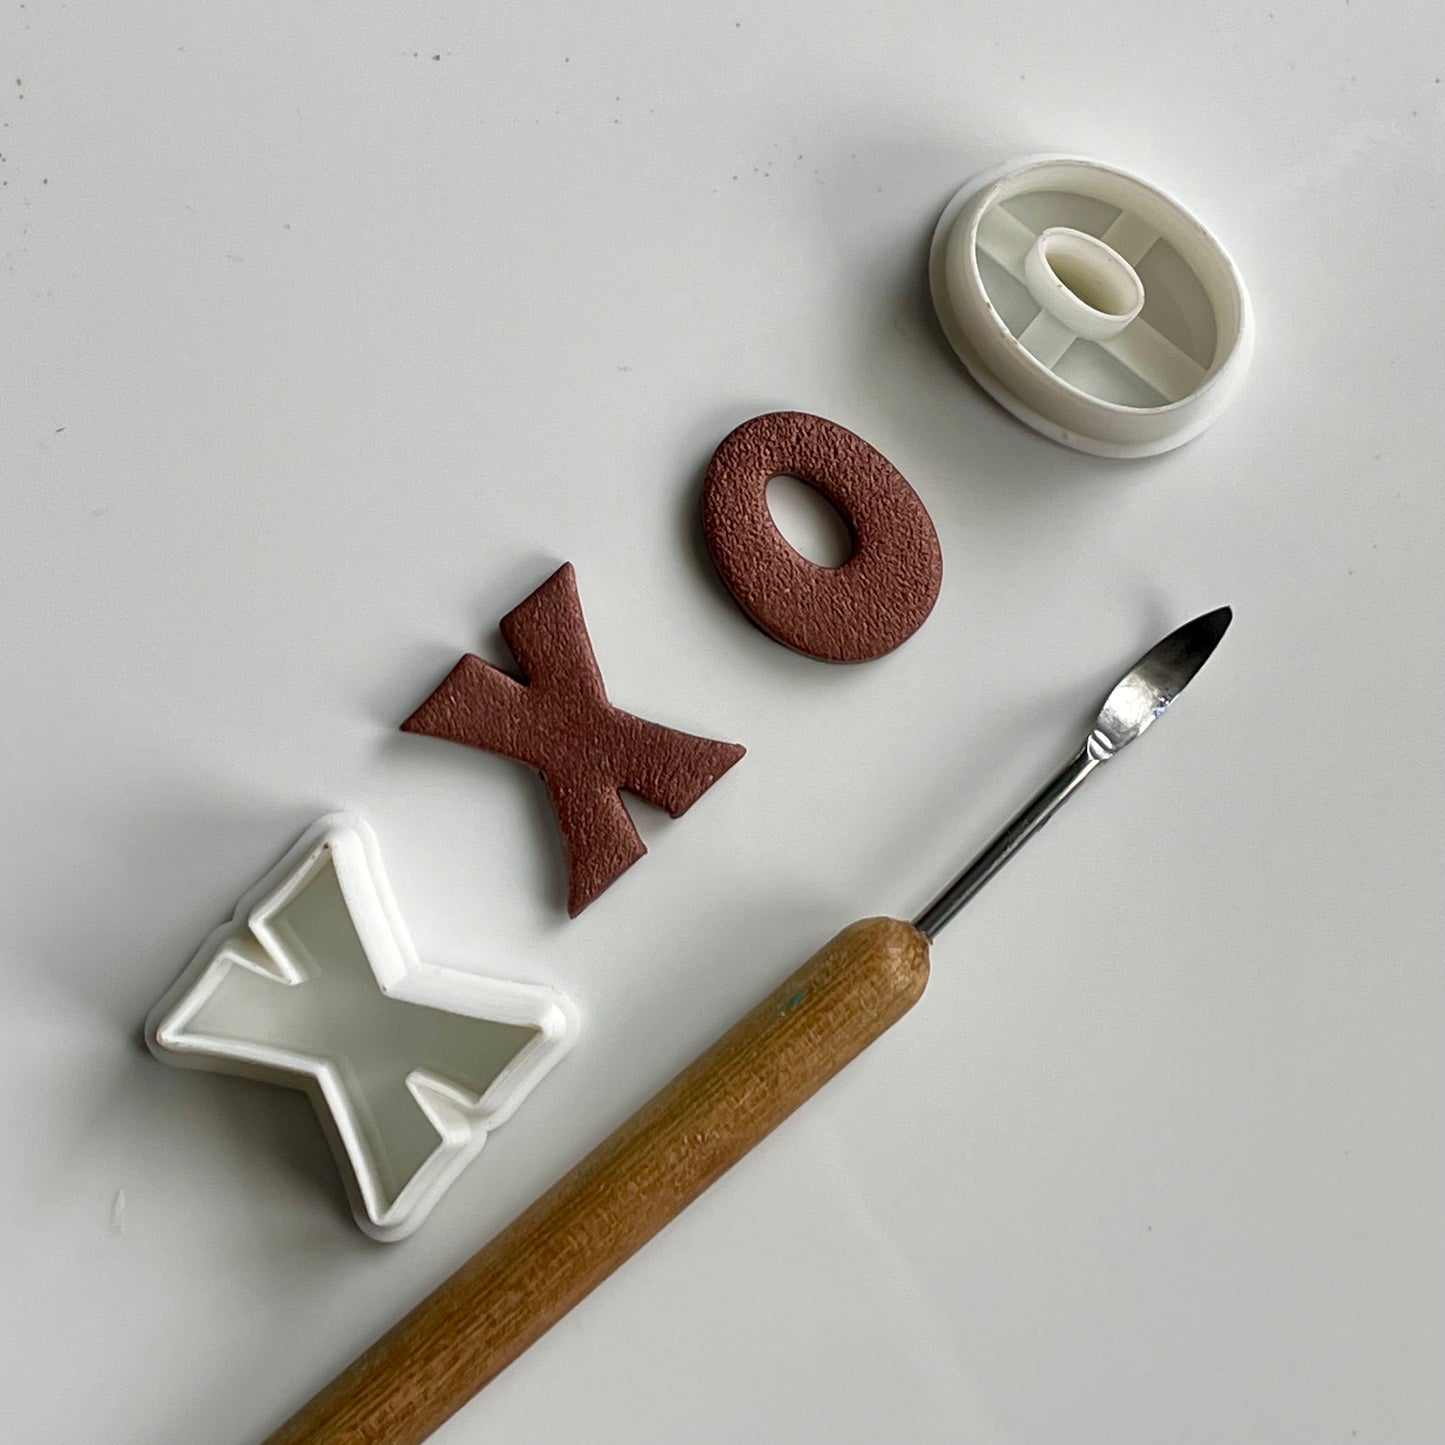 X and O cutter pair - made for use with polymer clay